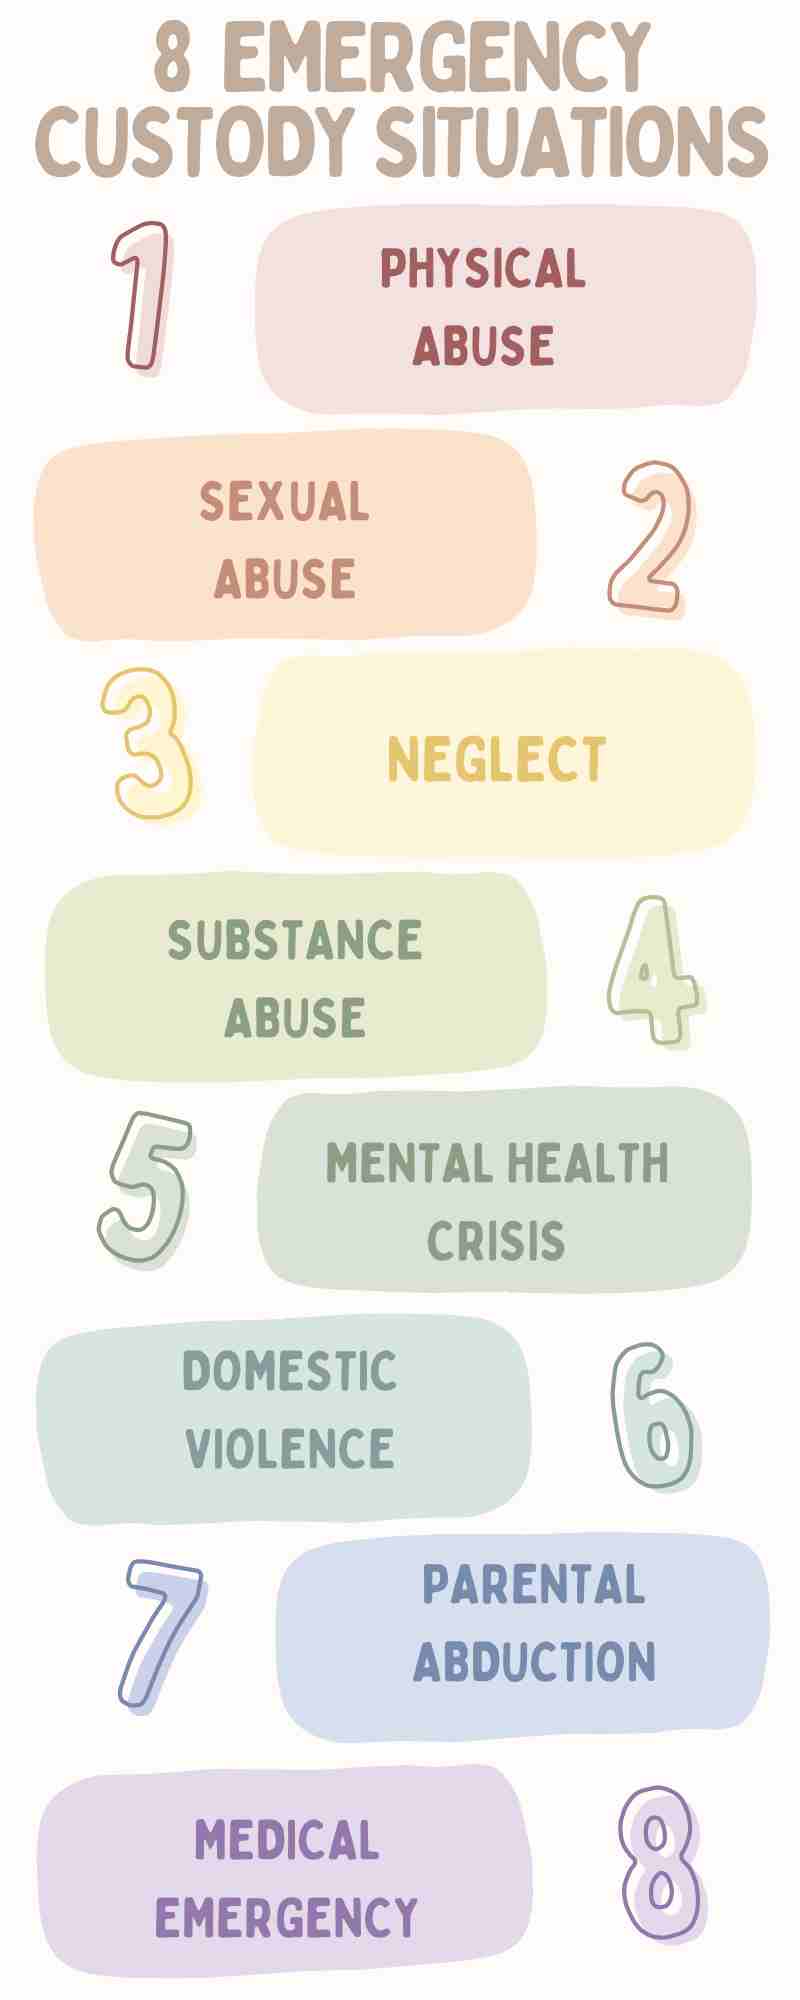 Infographic titled "8 Emergency Custody Situations" lists: physical abuse, sexual abuse, neglect, substance abuse, mental health crisis, domestic violence, parental abduction, and medical emergency.